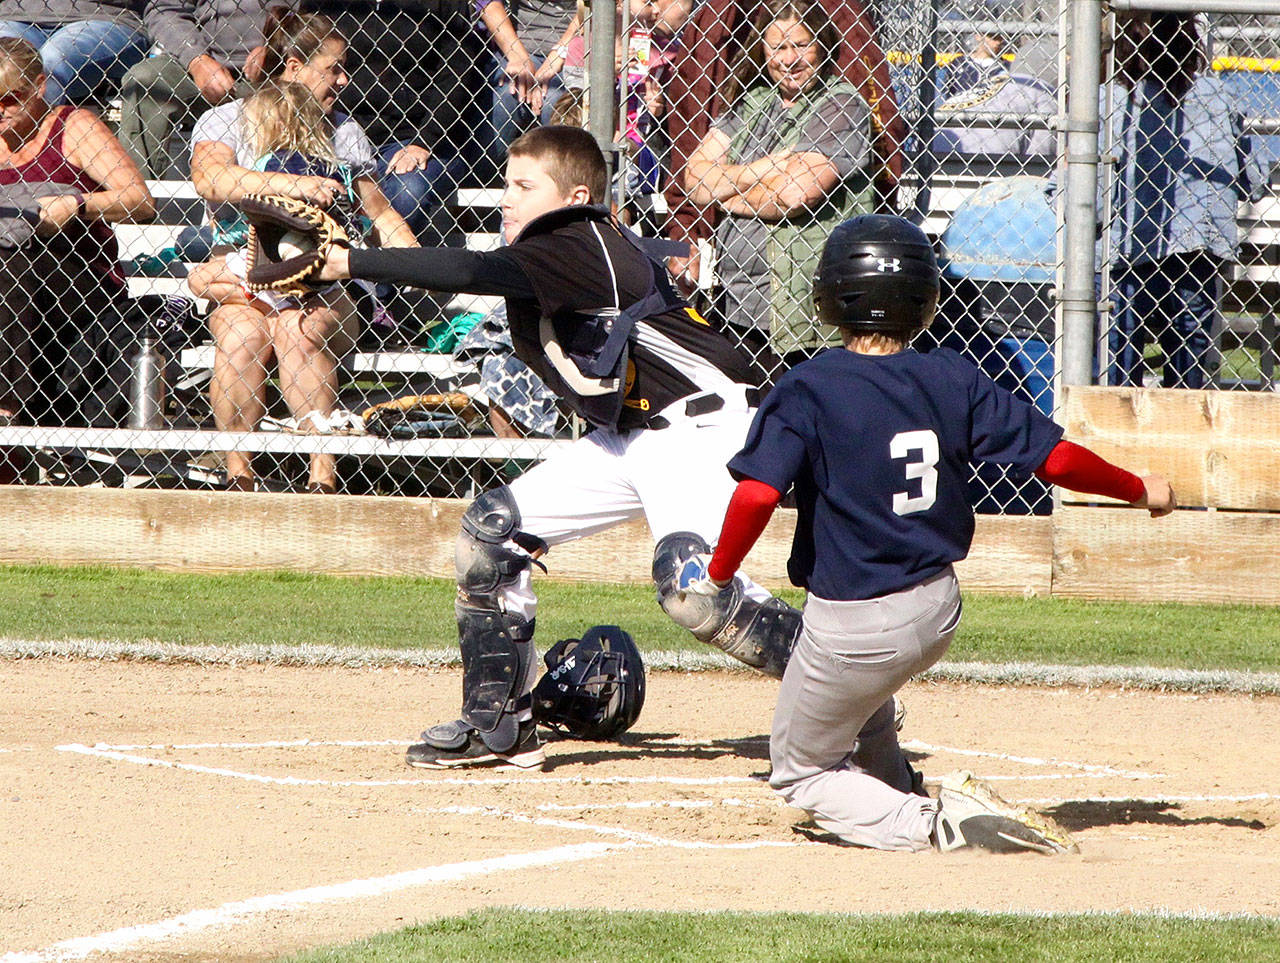 Dave Logan/for Peninsula Daily News The 21st annual Dick Brown Memorial Baseball Tournament began at the Lincoln Park fields in Port Angeles Saturday. Twenty teams from as far as Bellevue and Edmonds are competing. The two-day tournament winds up with the championship games in each division scheduled for 4 p.m. today. Here, Sequim Crosscutter catcher Brayden White gets the ball from the outfield, but not in time to stop Bryton Amsdill of the Port Angeles 12-year-olds from sliding home safely for the first run of the game.